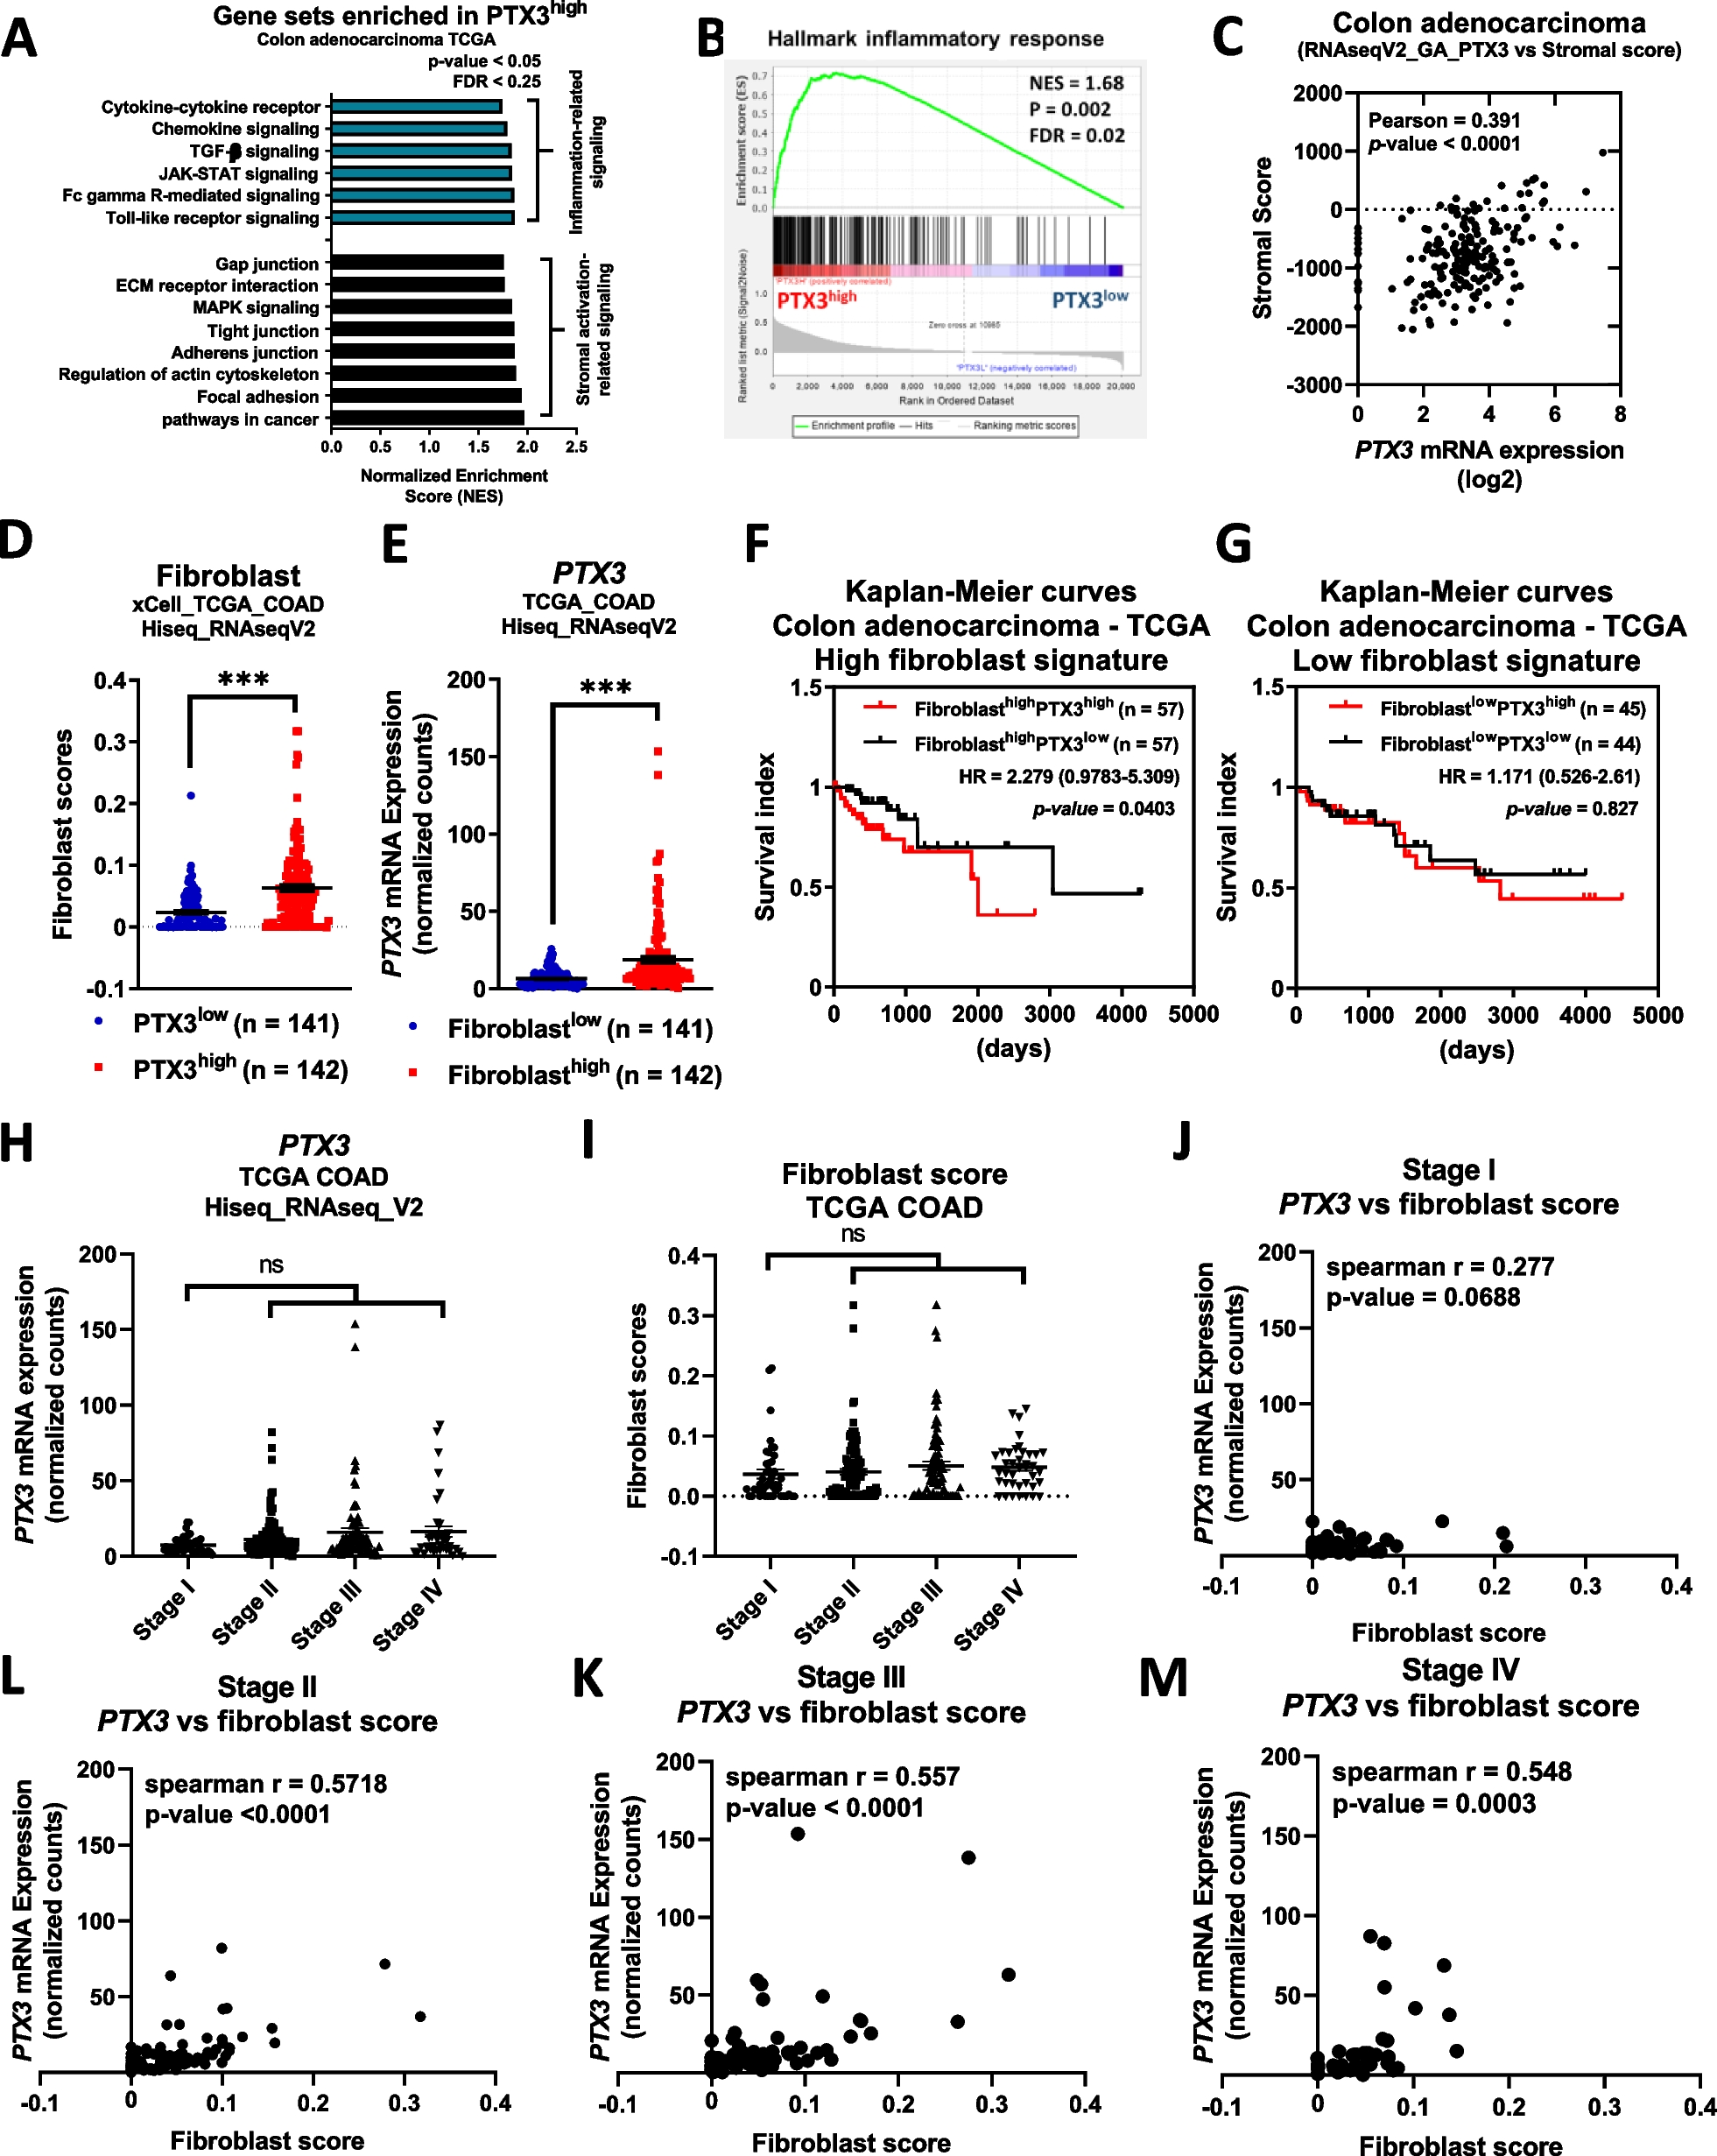 Inactivation of pentraxin 3 suppresses M2-like macrophage activity and immunosuppression in colon cancer